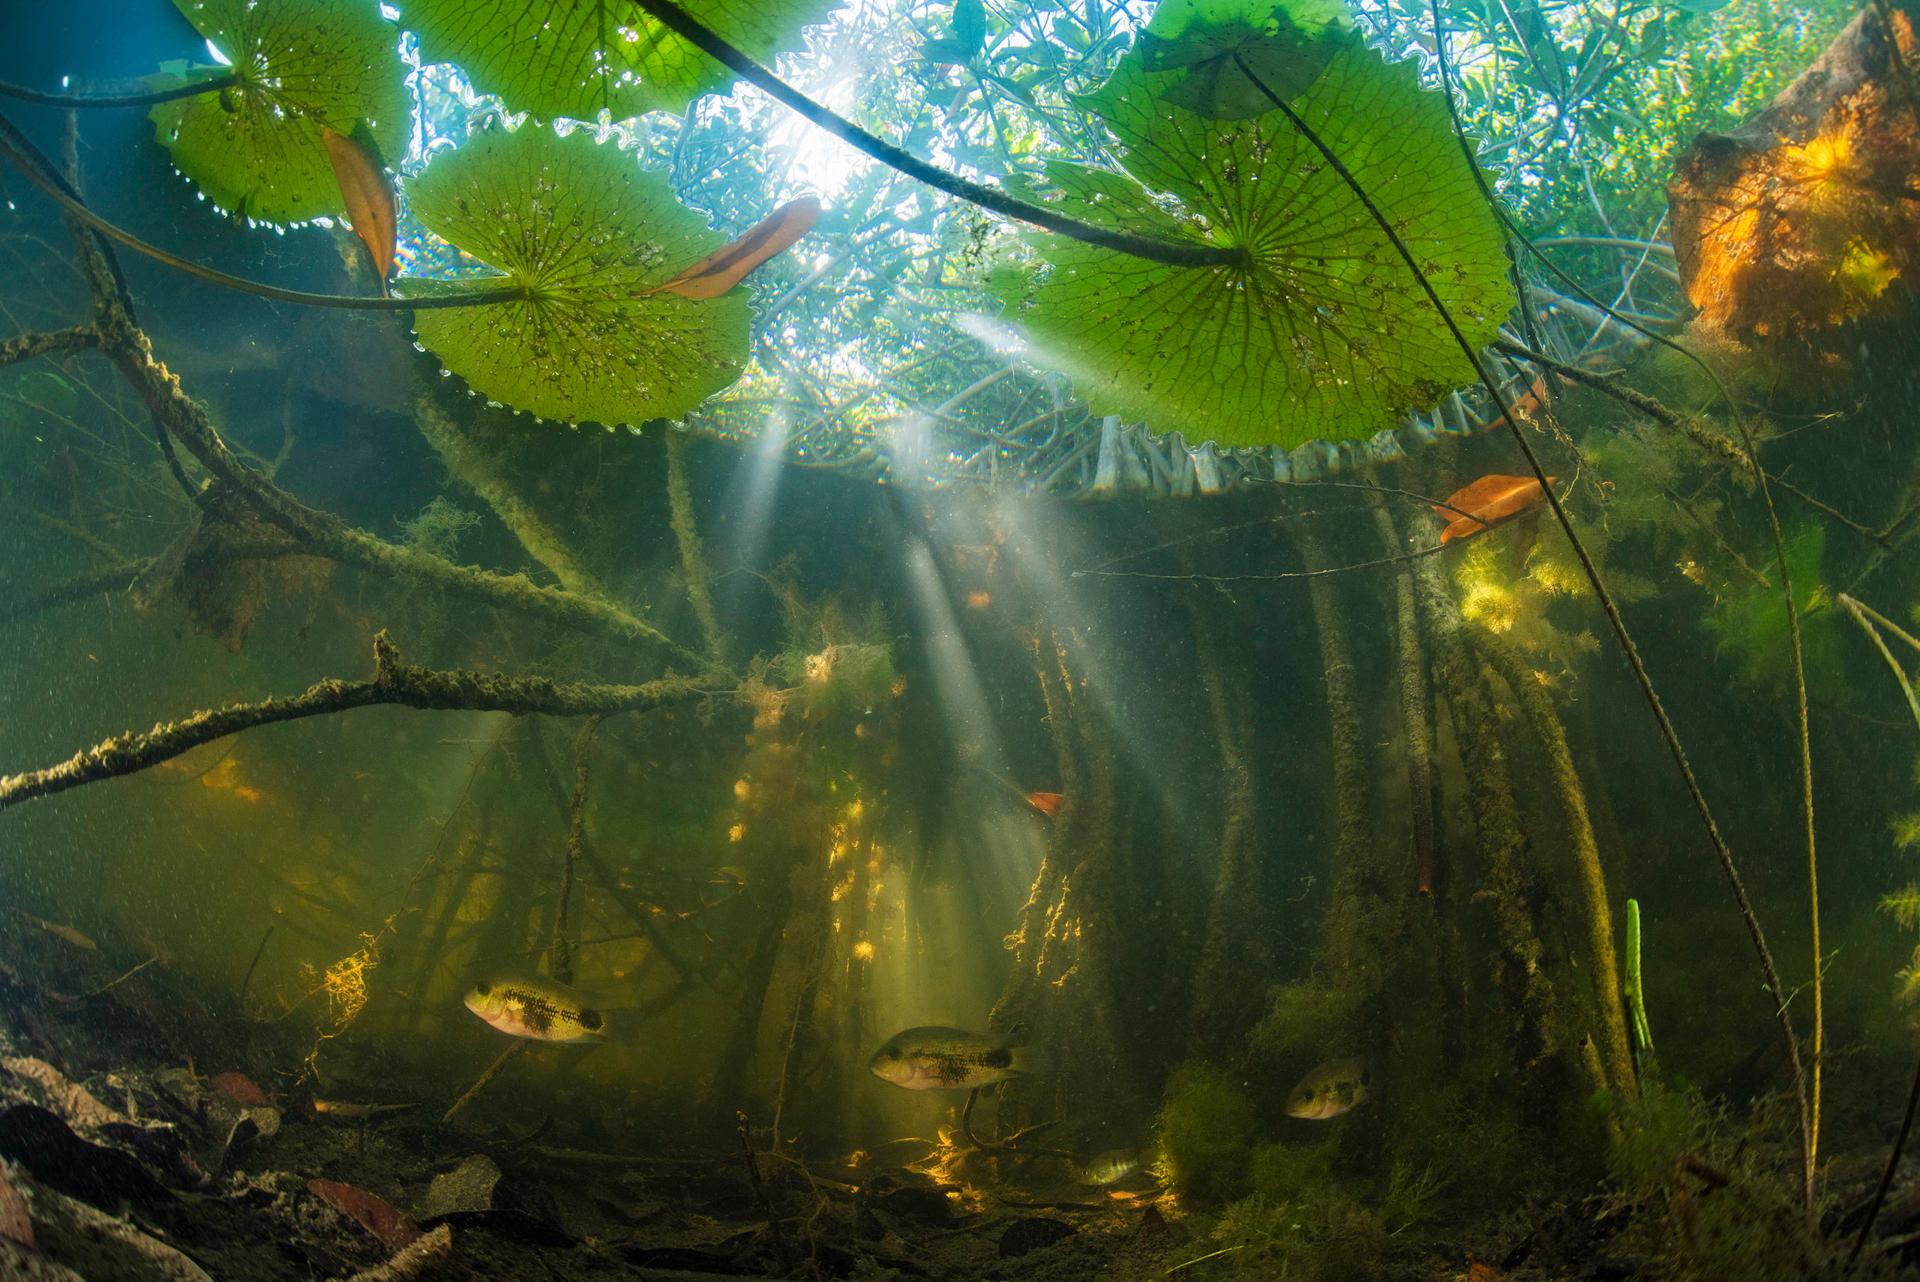 Fish and other aquatic life in the San Pedro Martir River in Tabasco, Mexico, amid submerged red mangrove roots.